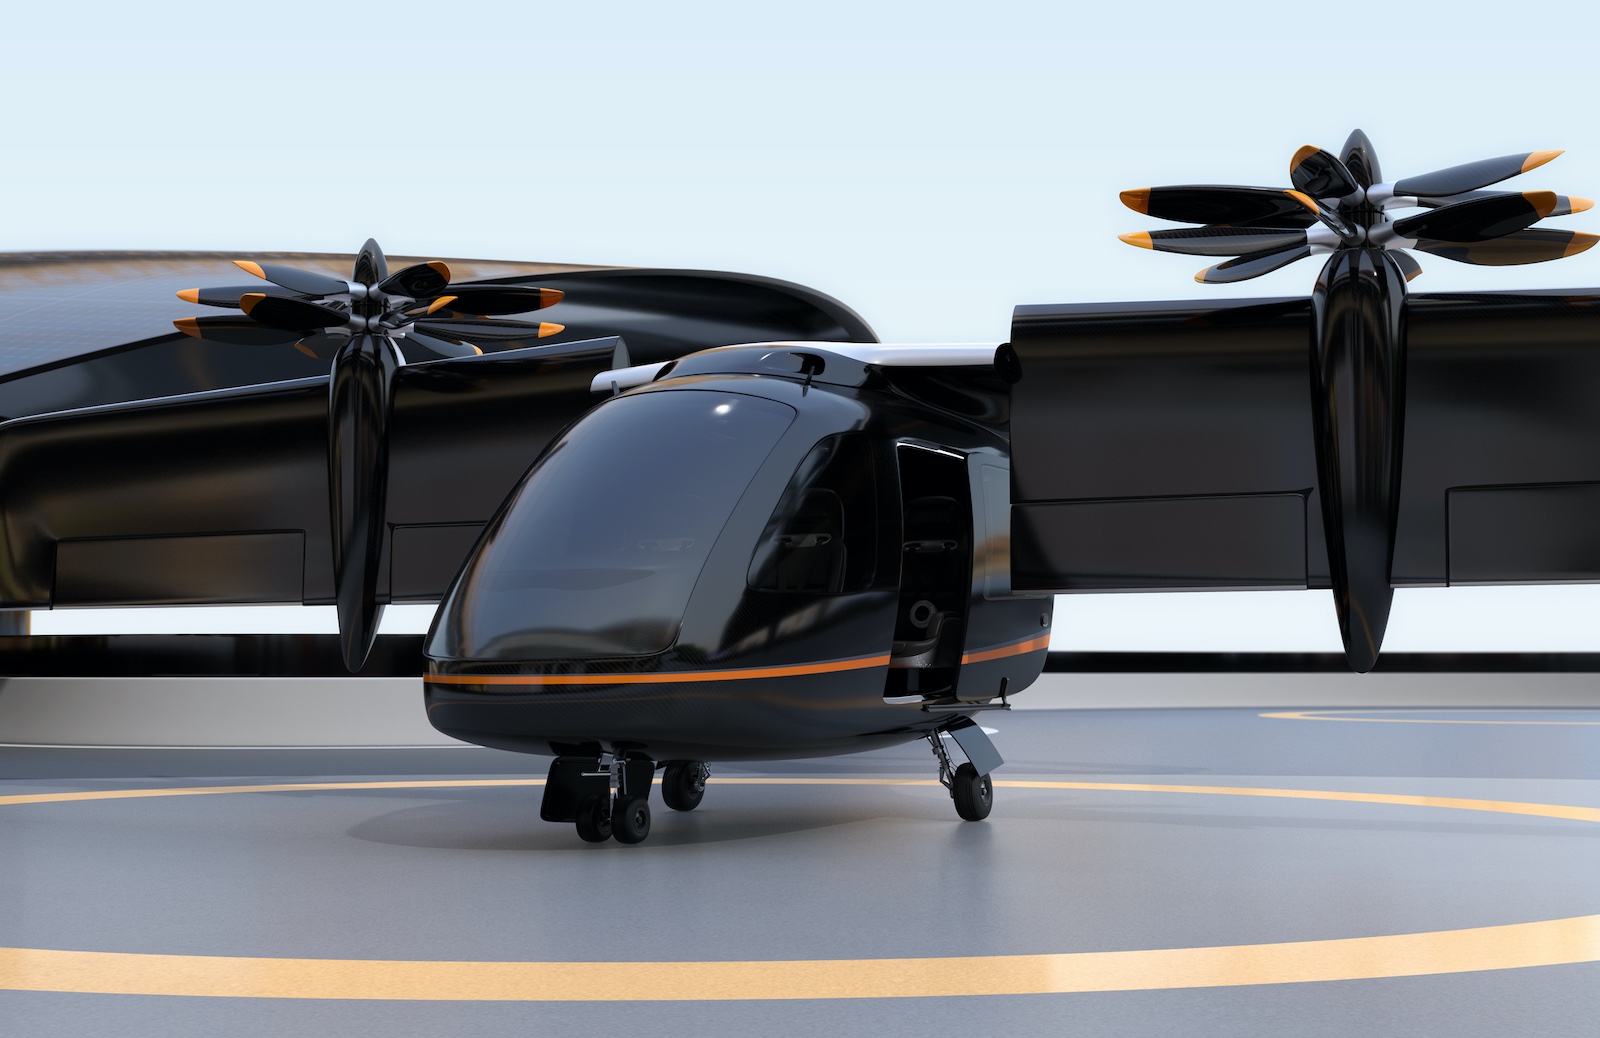 Electric vertical take-off and landing (eVTOL) aircraft take off vertically like a helicopter, powered by electric motors instead of conventional combustion engines. Propellers or rotors ensure they can take off vertically, hover in place, and fly horizontally.